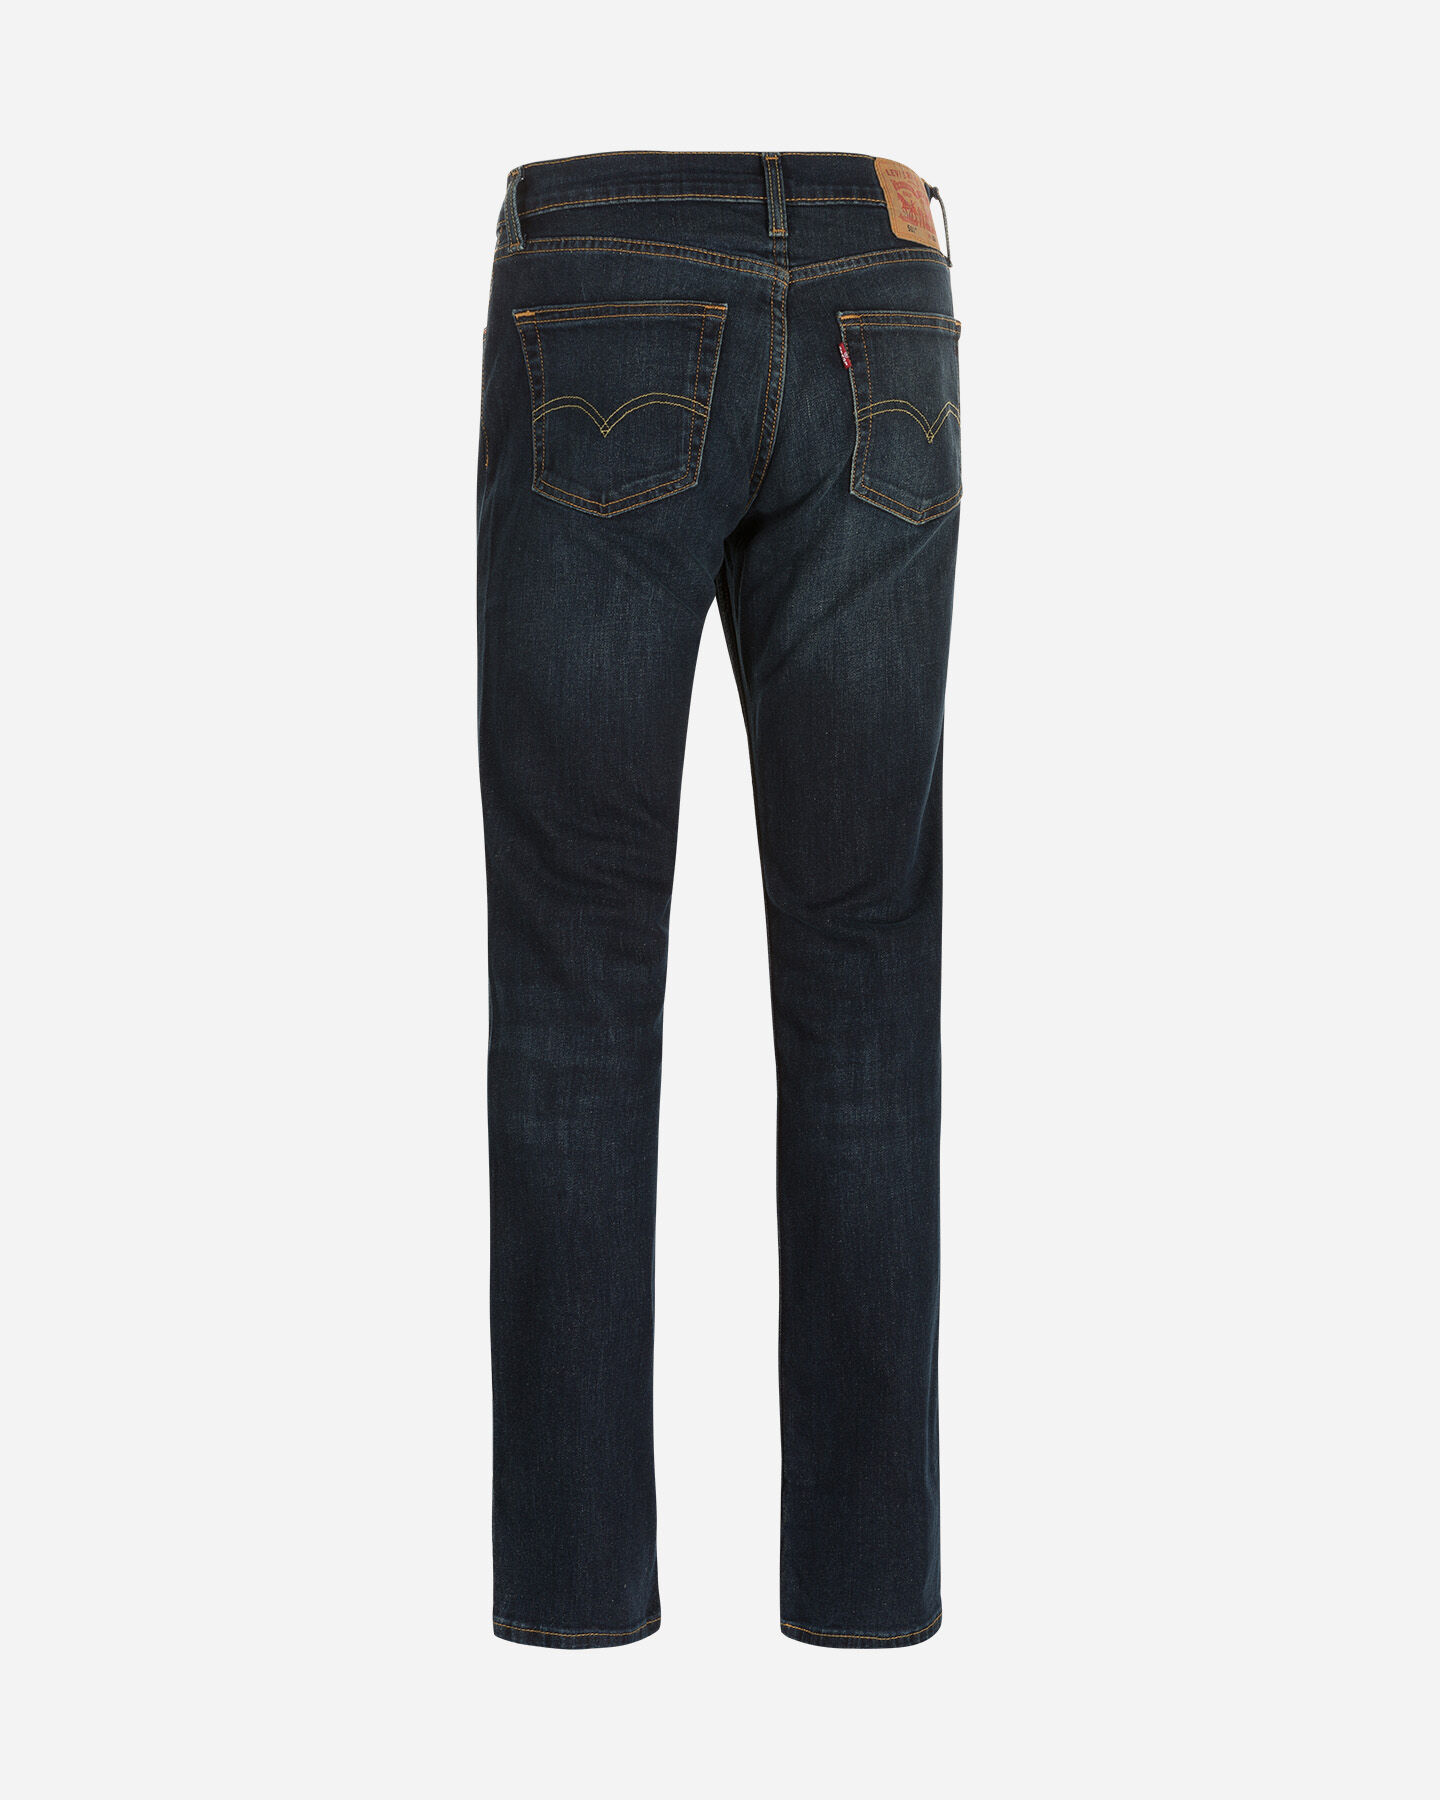  Jeans LEVI'S 511 SLIM FIT M S4103066|1390|29 scatto 1